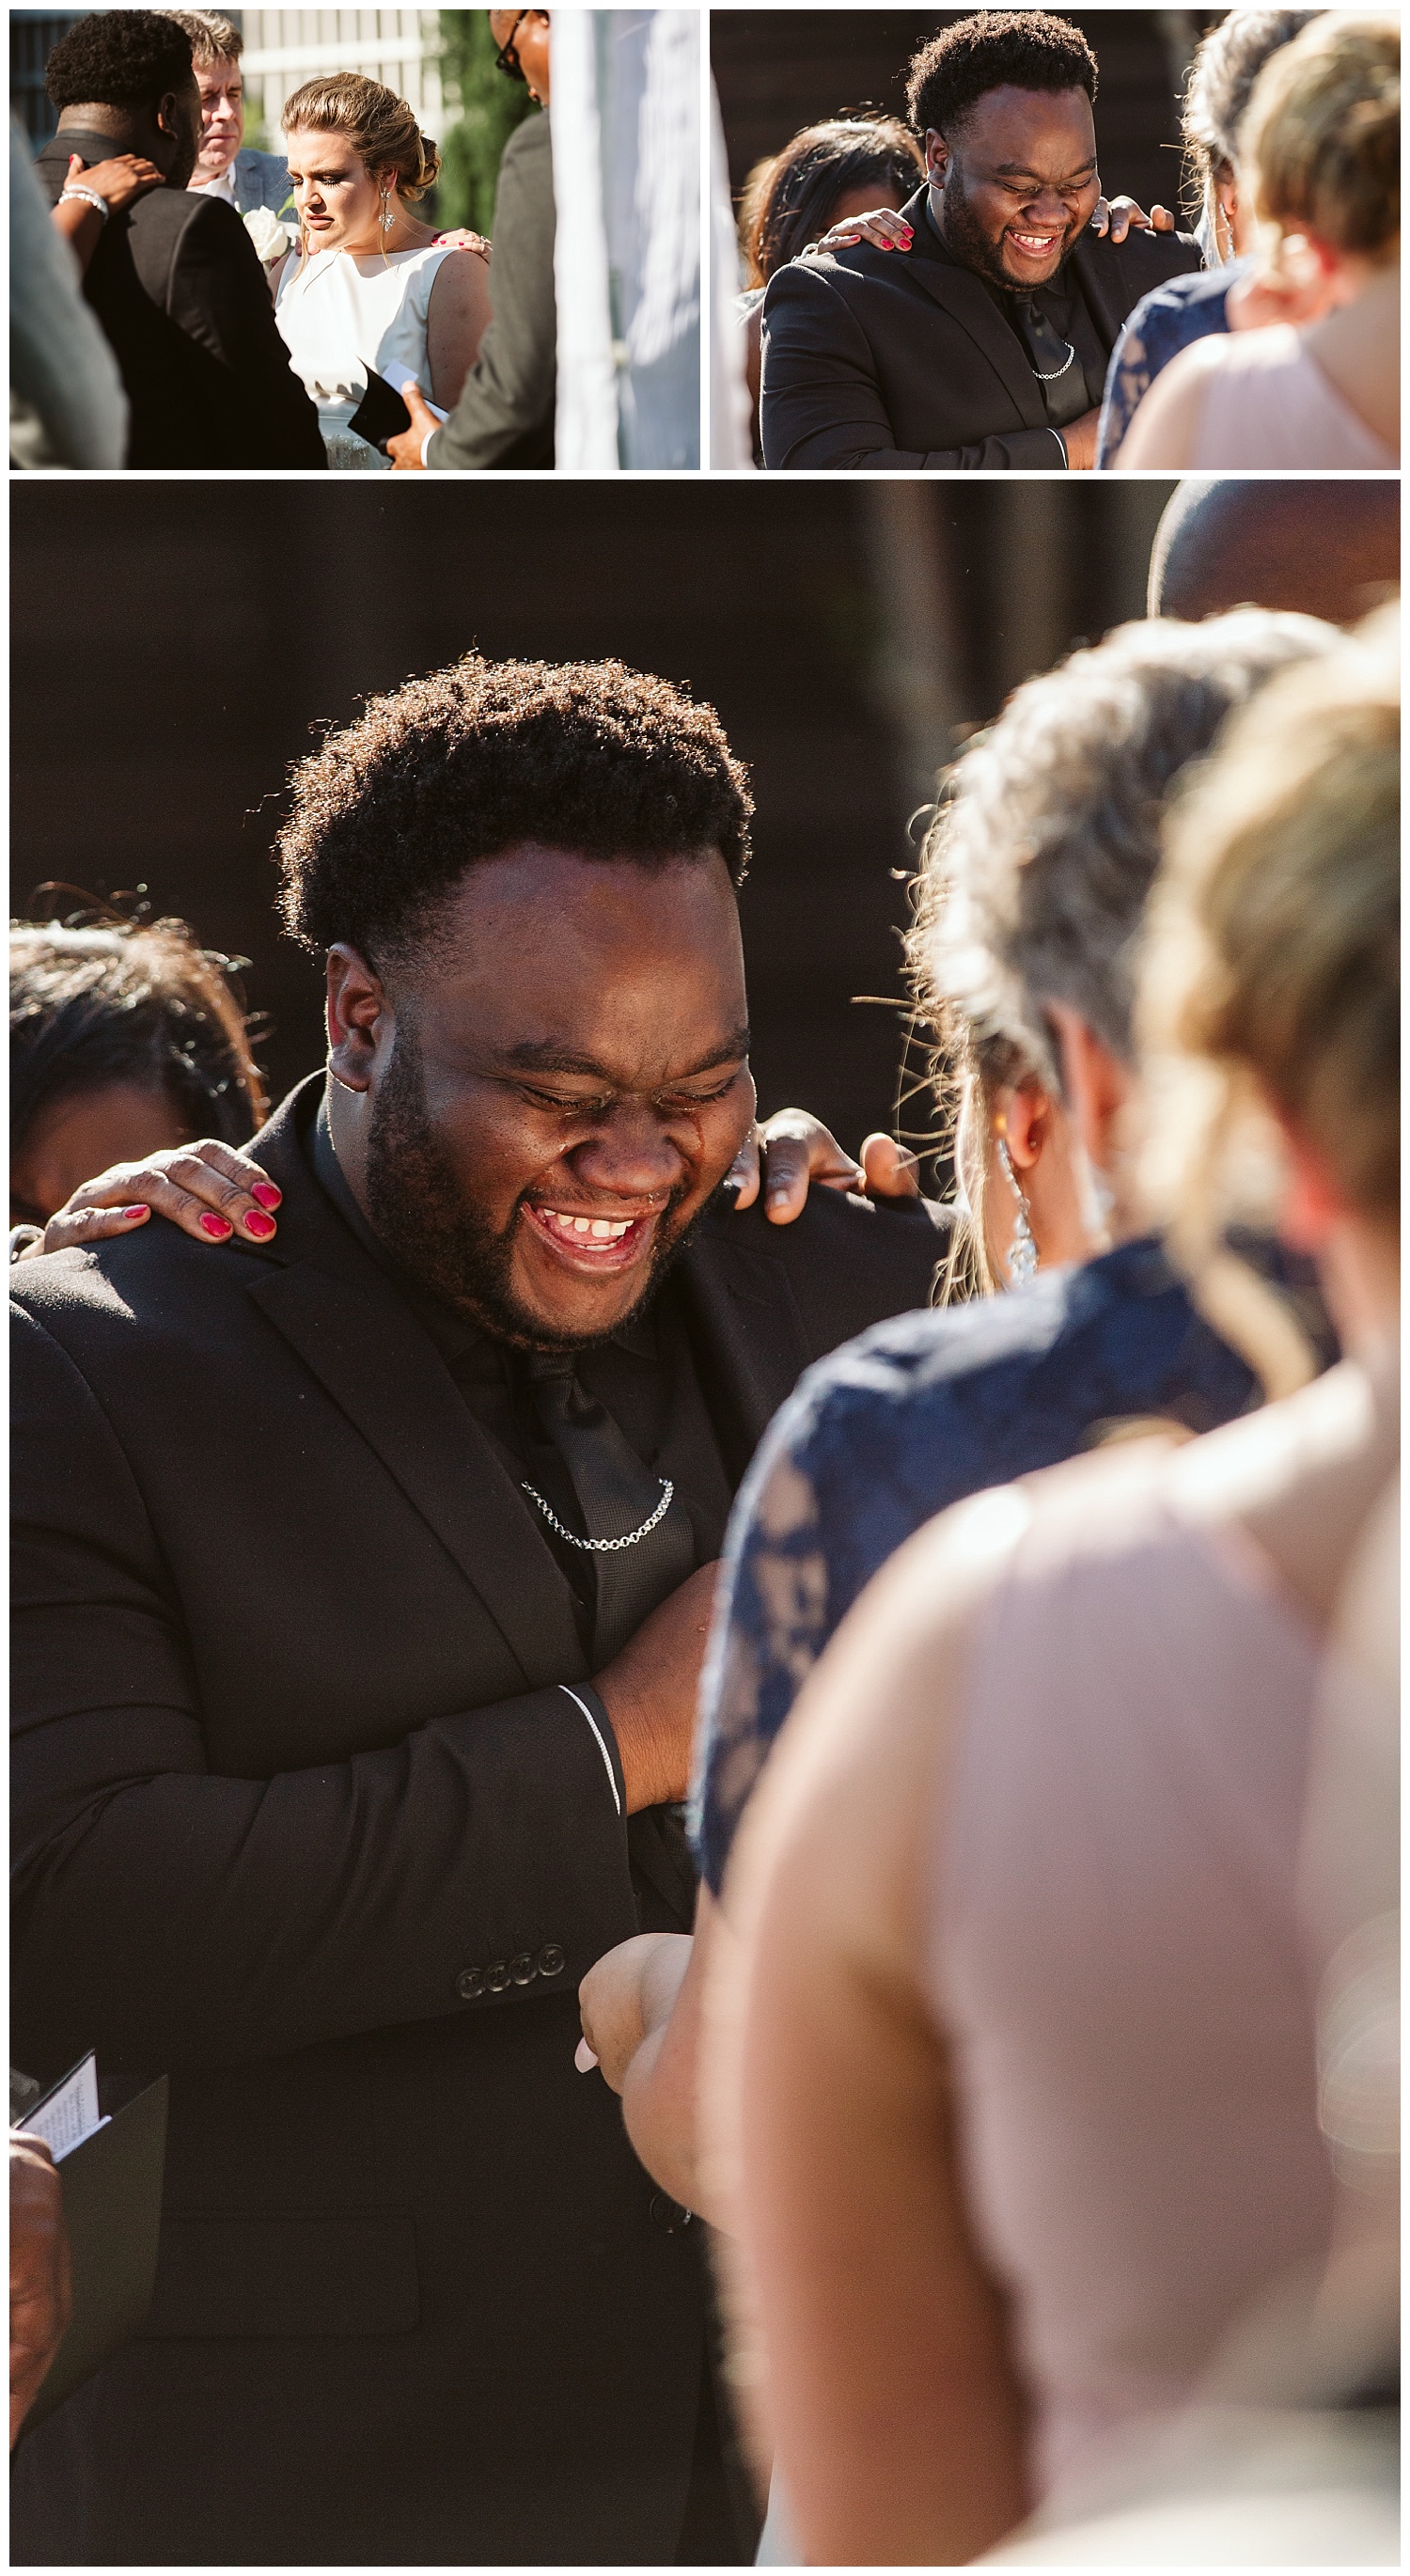 man in black suit crying and laughing, The Cordelle, Nashville wedding photography, Country Music Hall of Fame wedding reception, Tennessee wedding Planning, Wedding Inspiration, Engagement Inspiration, Downtown Nashville, The Cordelle Nashville, wedding venue